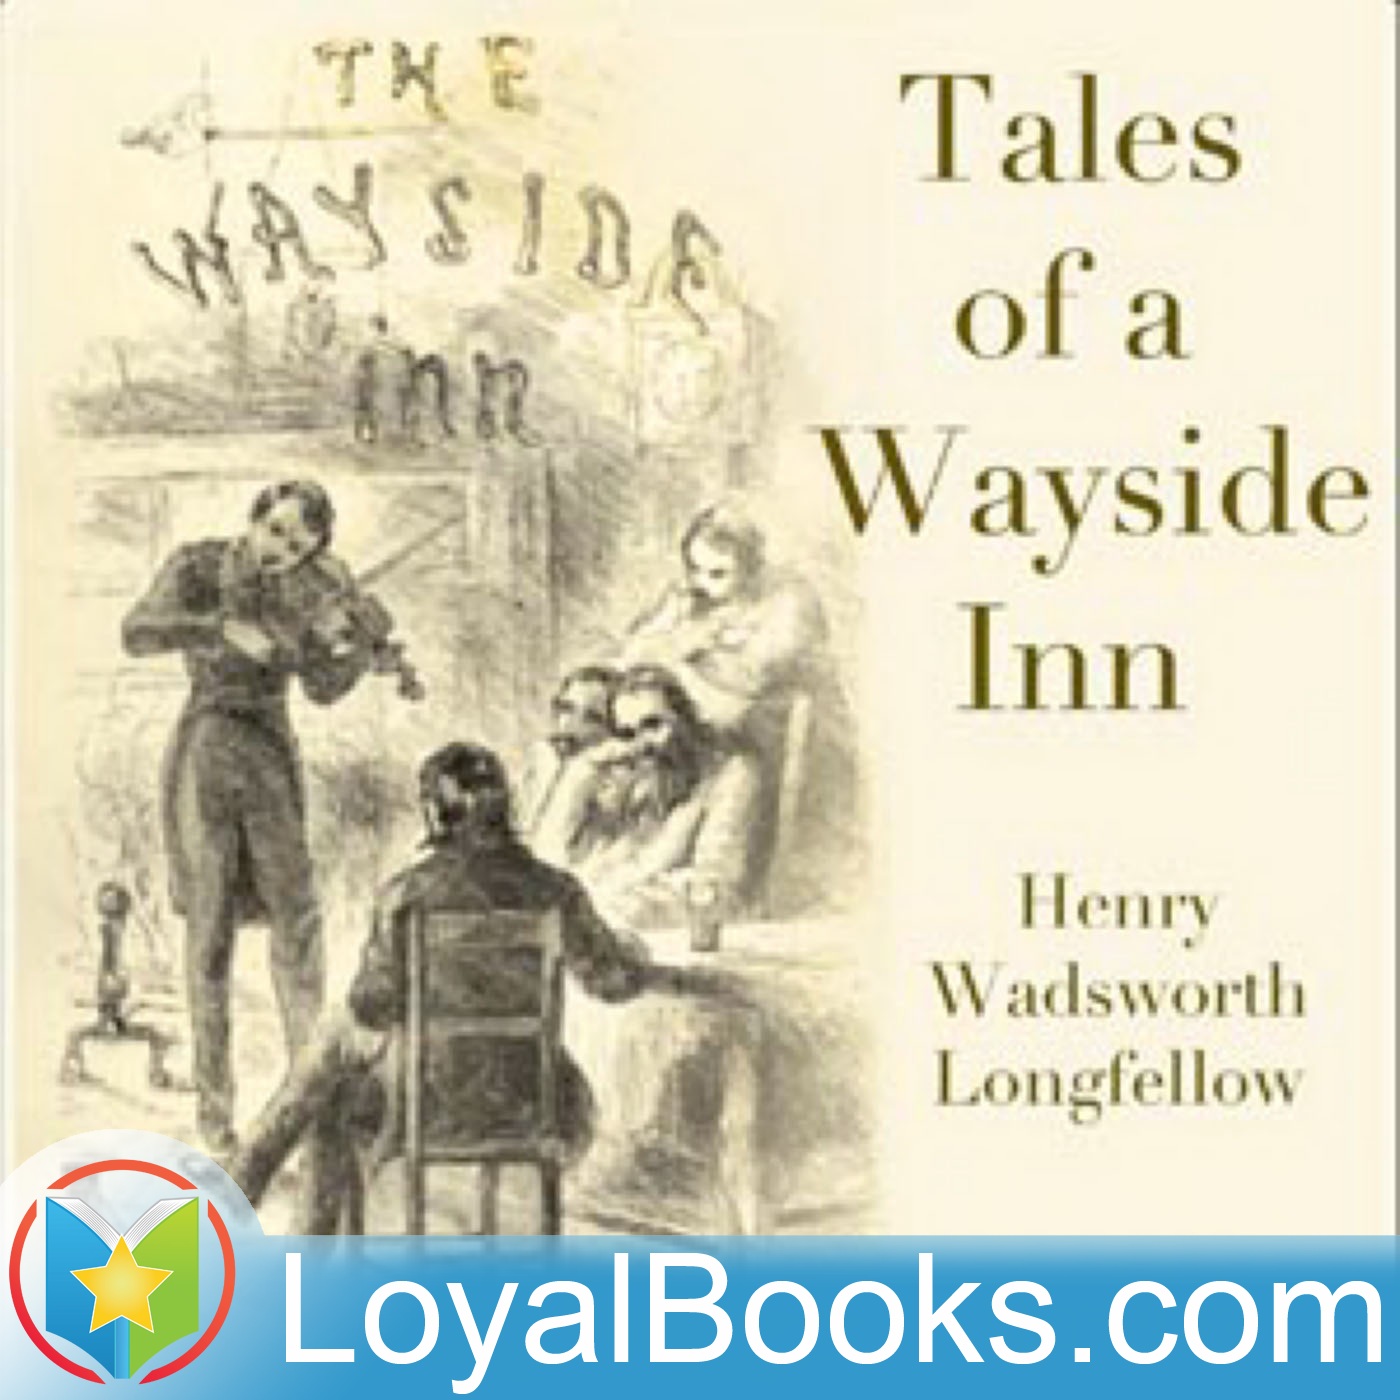 Tales of a Wayside Inn by Henry Wadsworth Longfellow